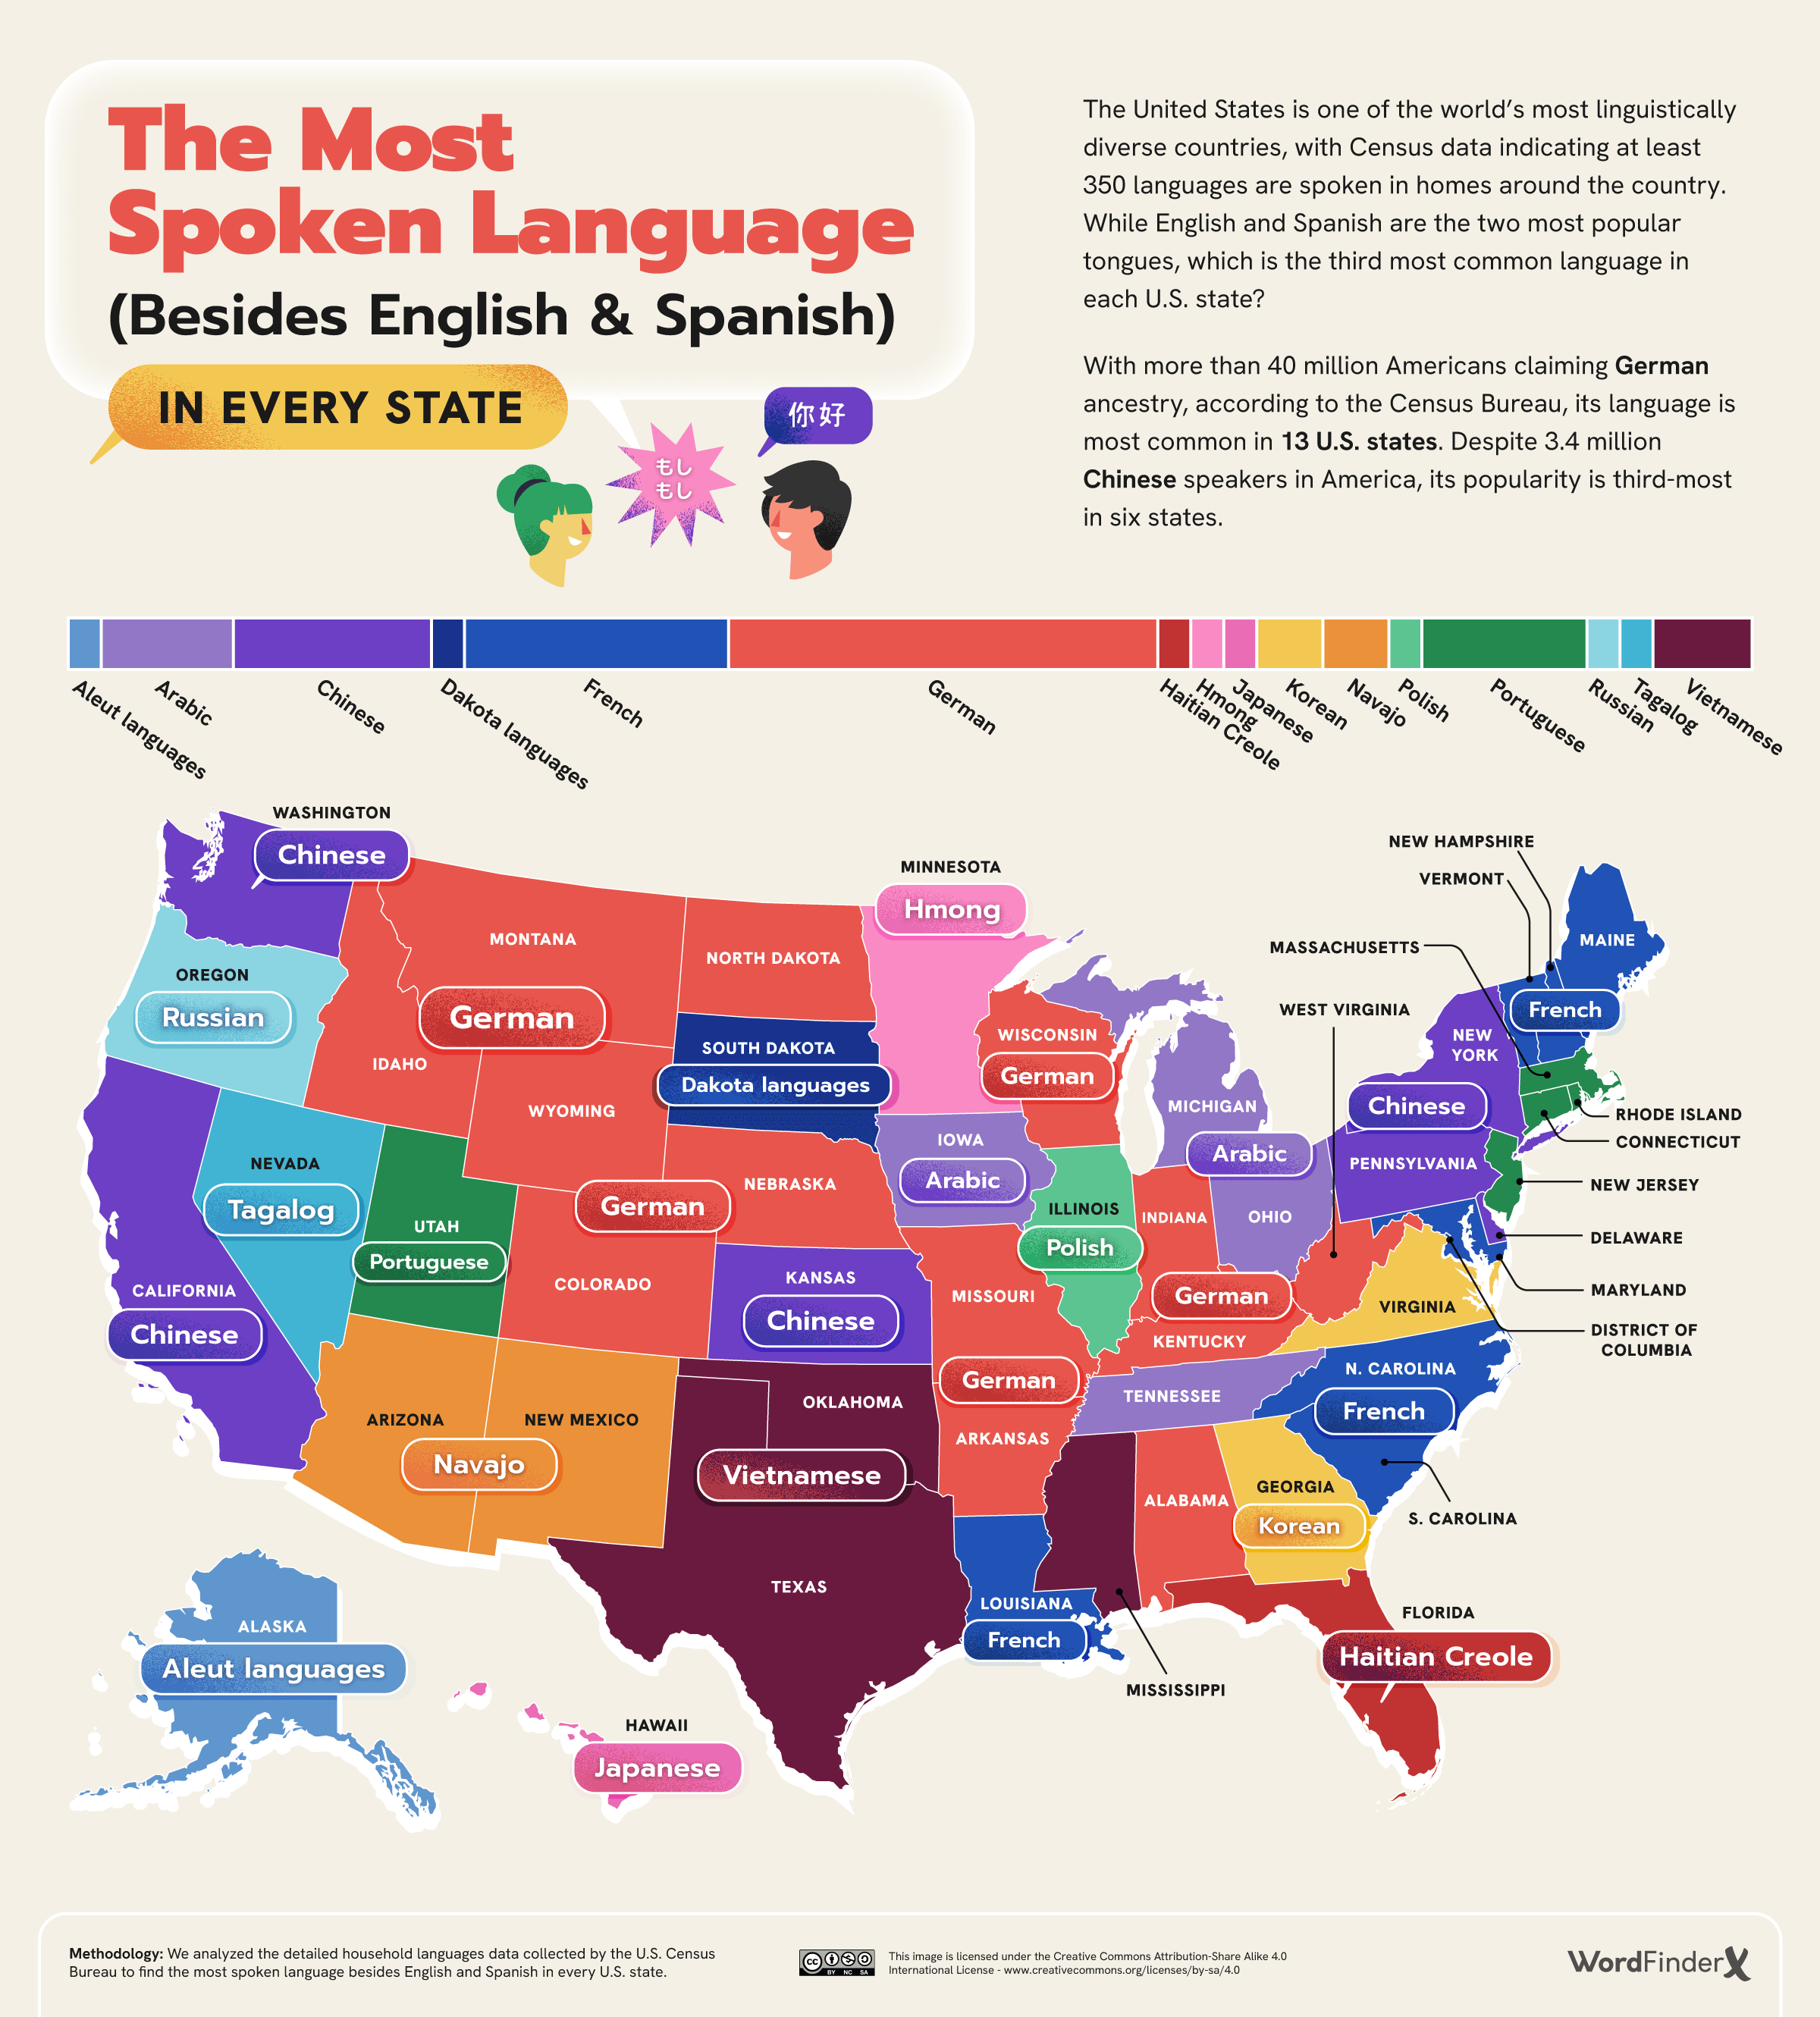 The-Most-Spoken-Language-Besides-English-Spanish-in-Every-State